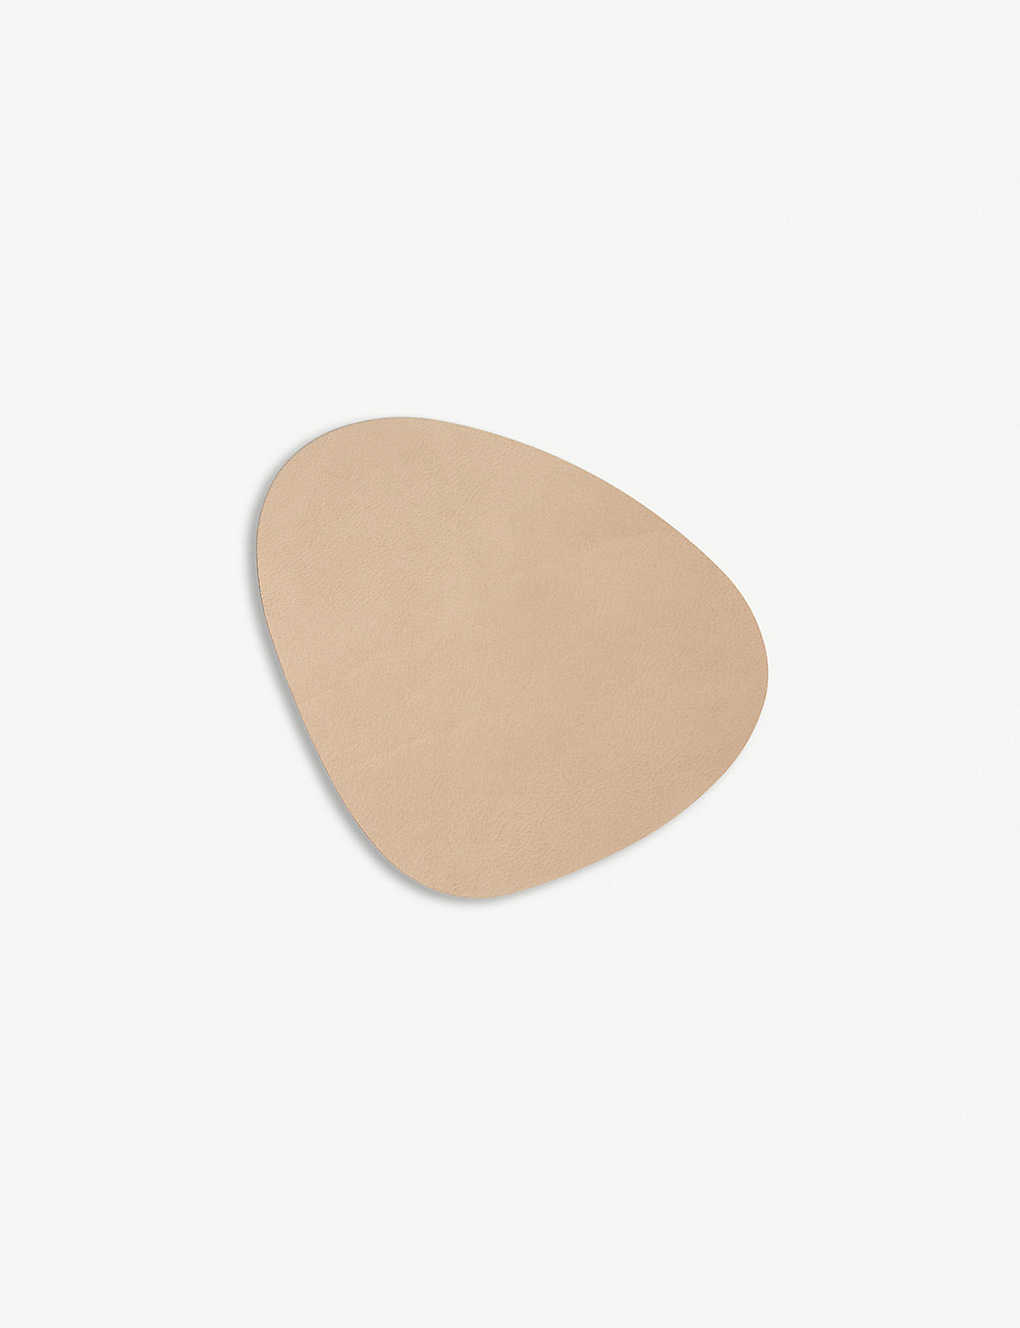 Lind Dna Nupo Curve Leather Coaster In Sand